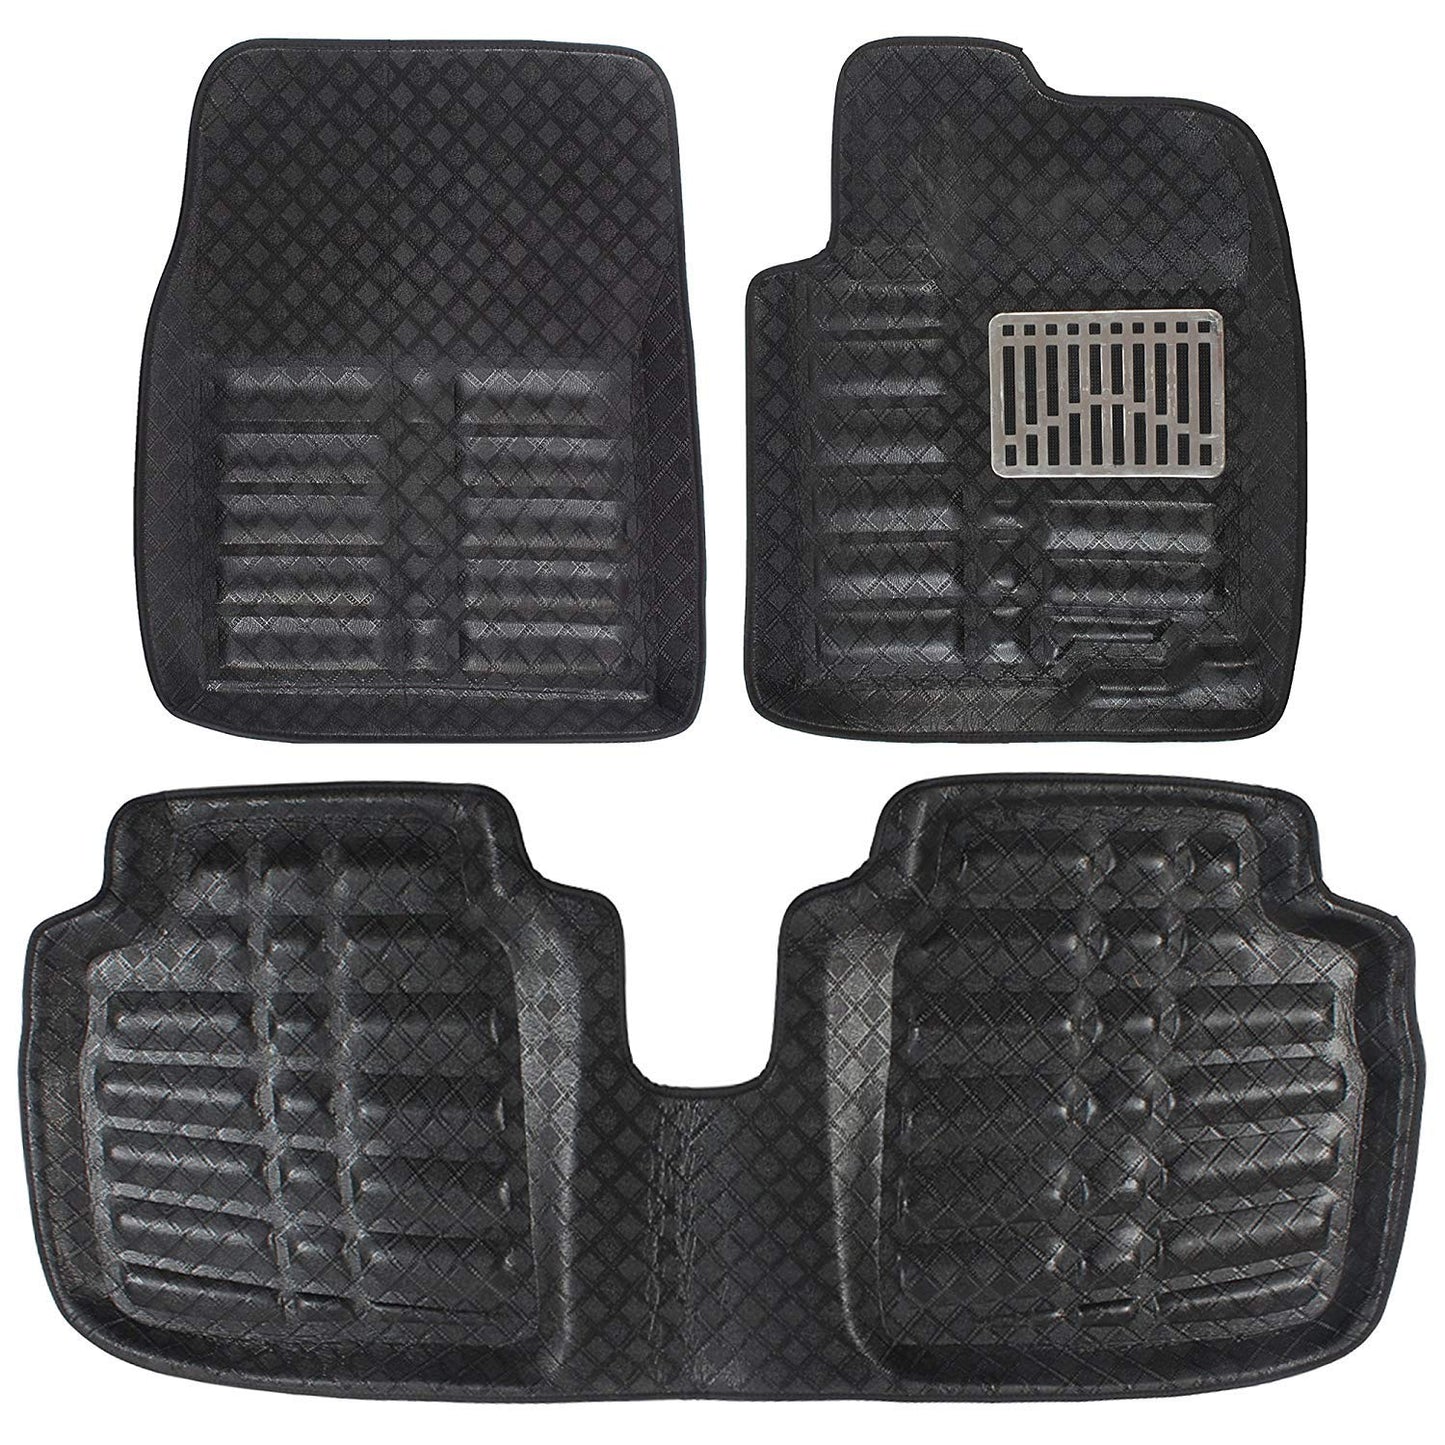 Oshotto 4D Artificial Leather Car Floor Mats For Toyota Innova - Set of 5 (Complete Mat with 3rd Row and Dicky) - Black